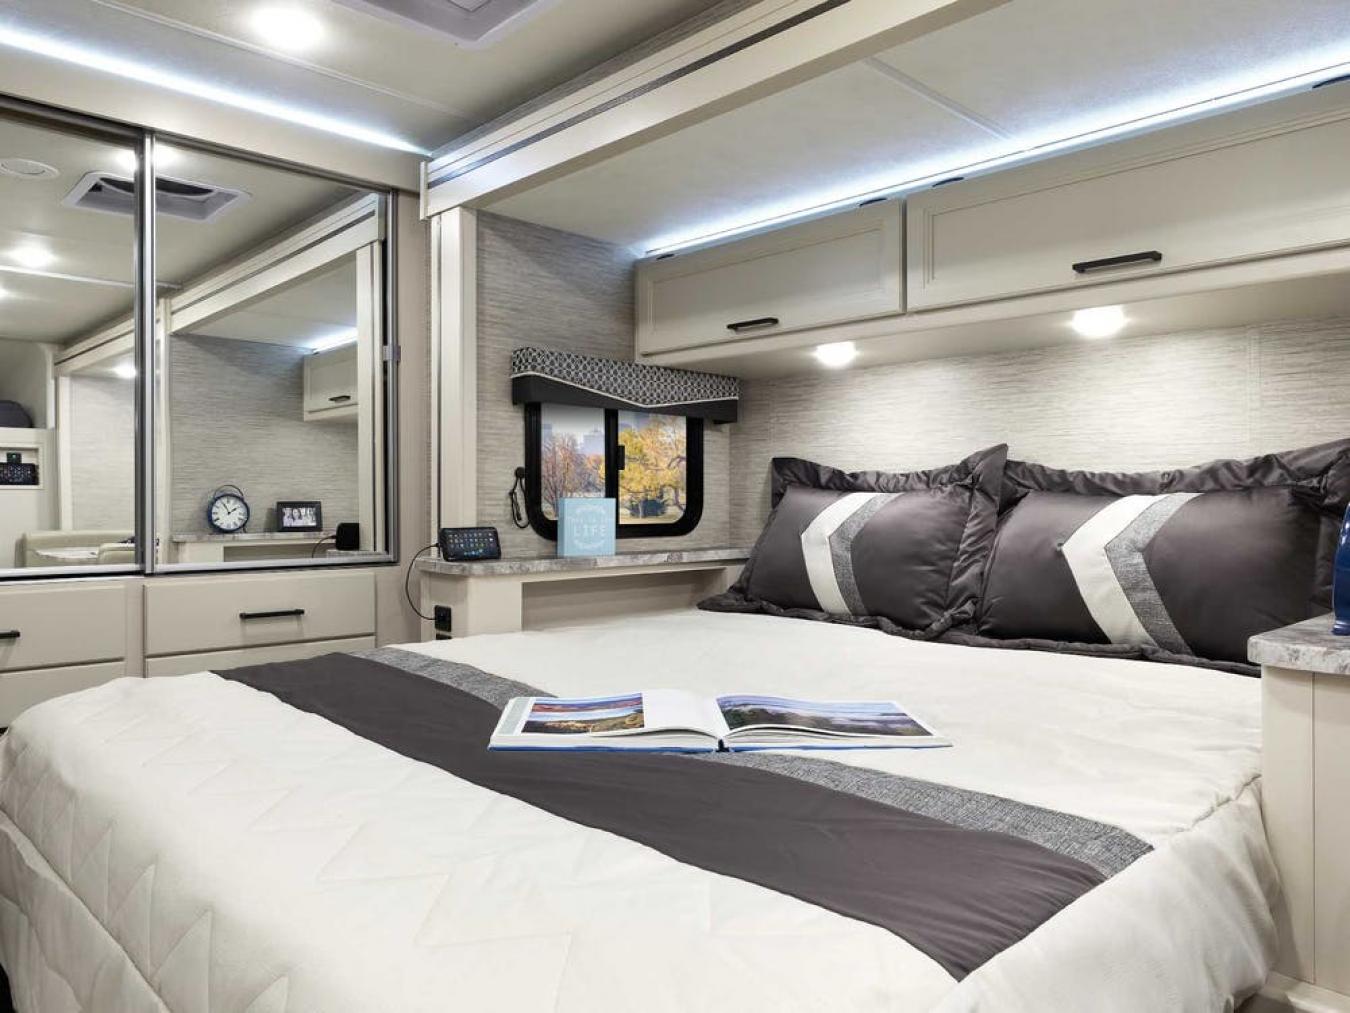 Bedroom inside a Thor RV with neutral bedding